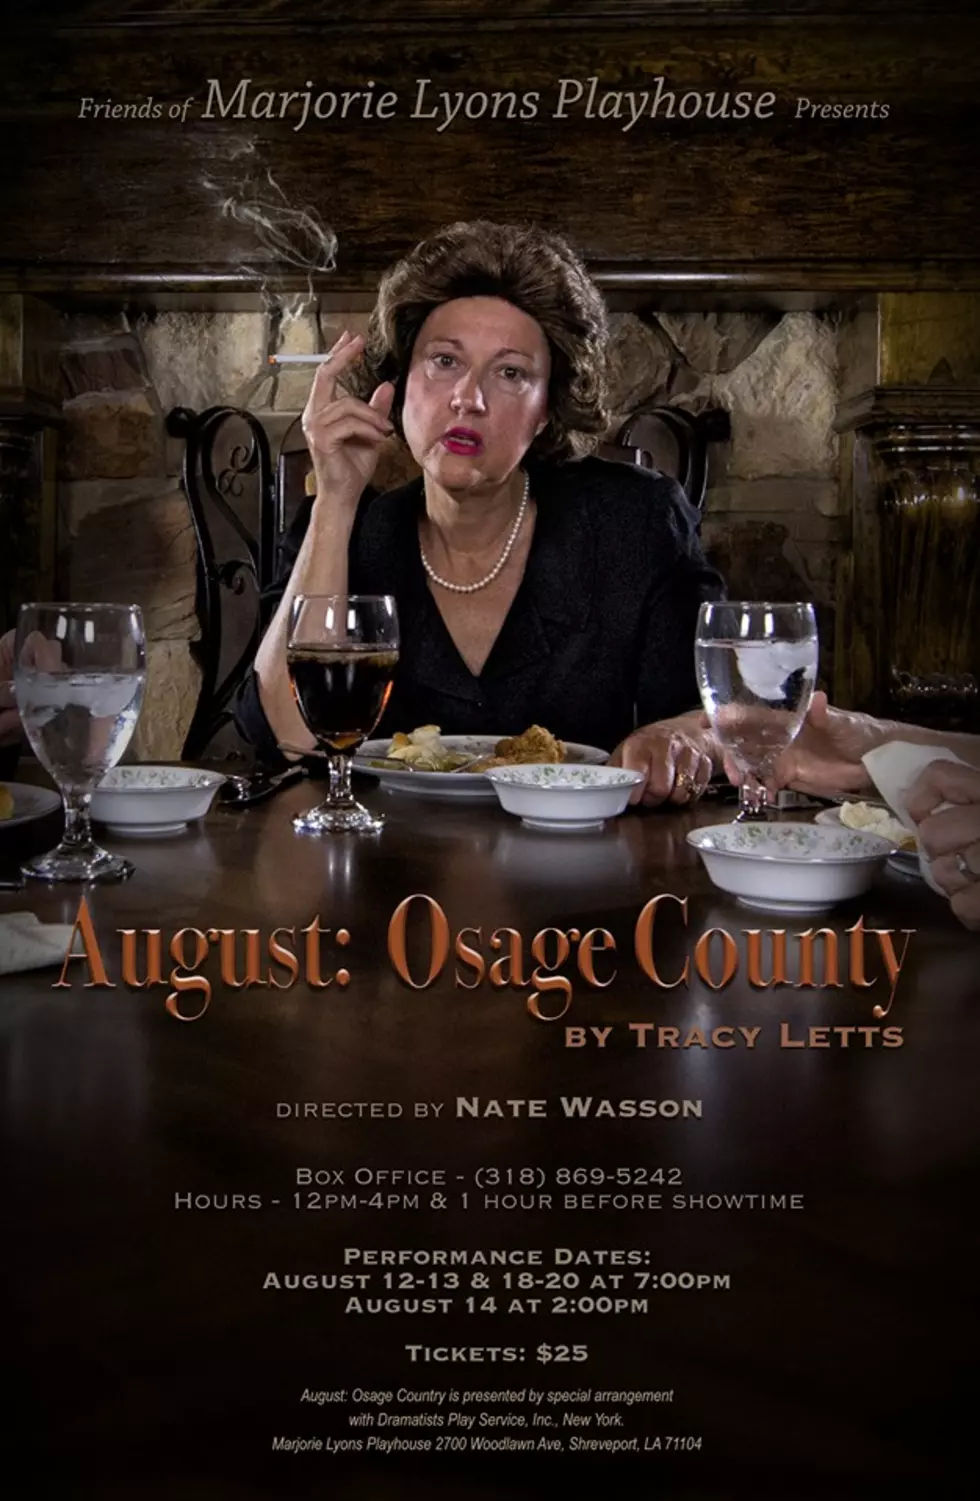 ‘Friends Of Marjorie Lyons Playhouse’ Presents “August: Osage County”